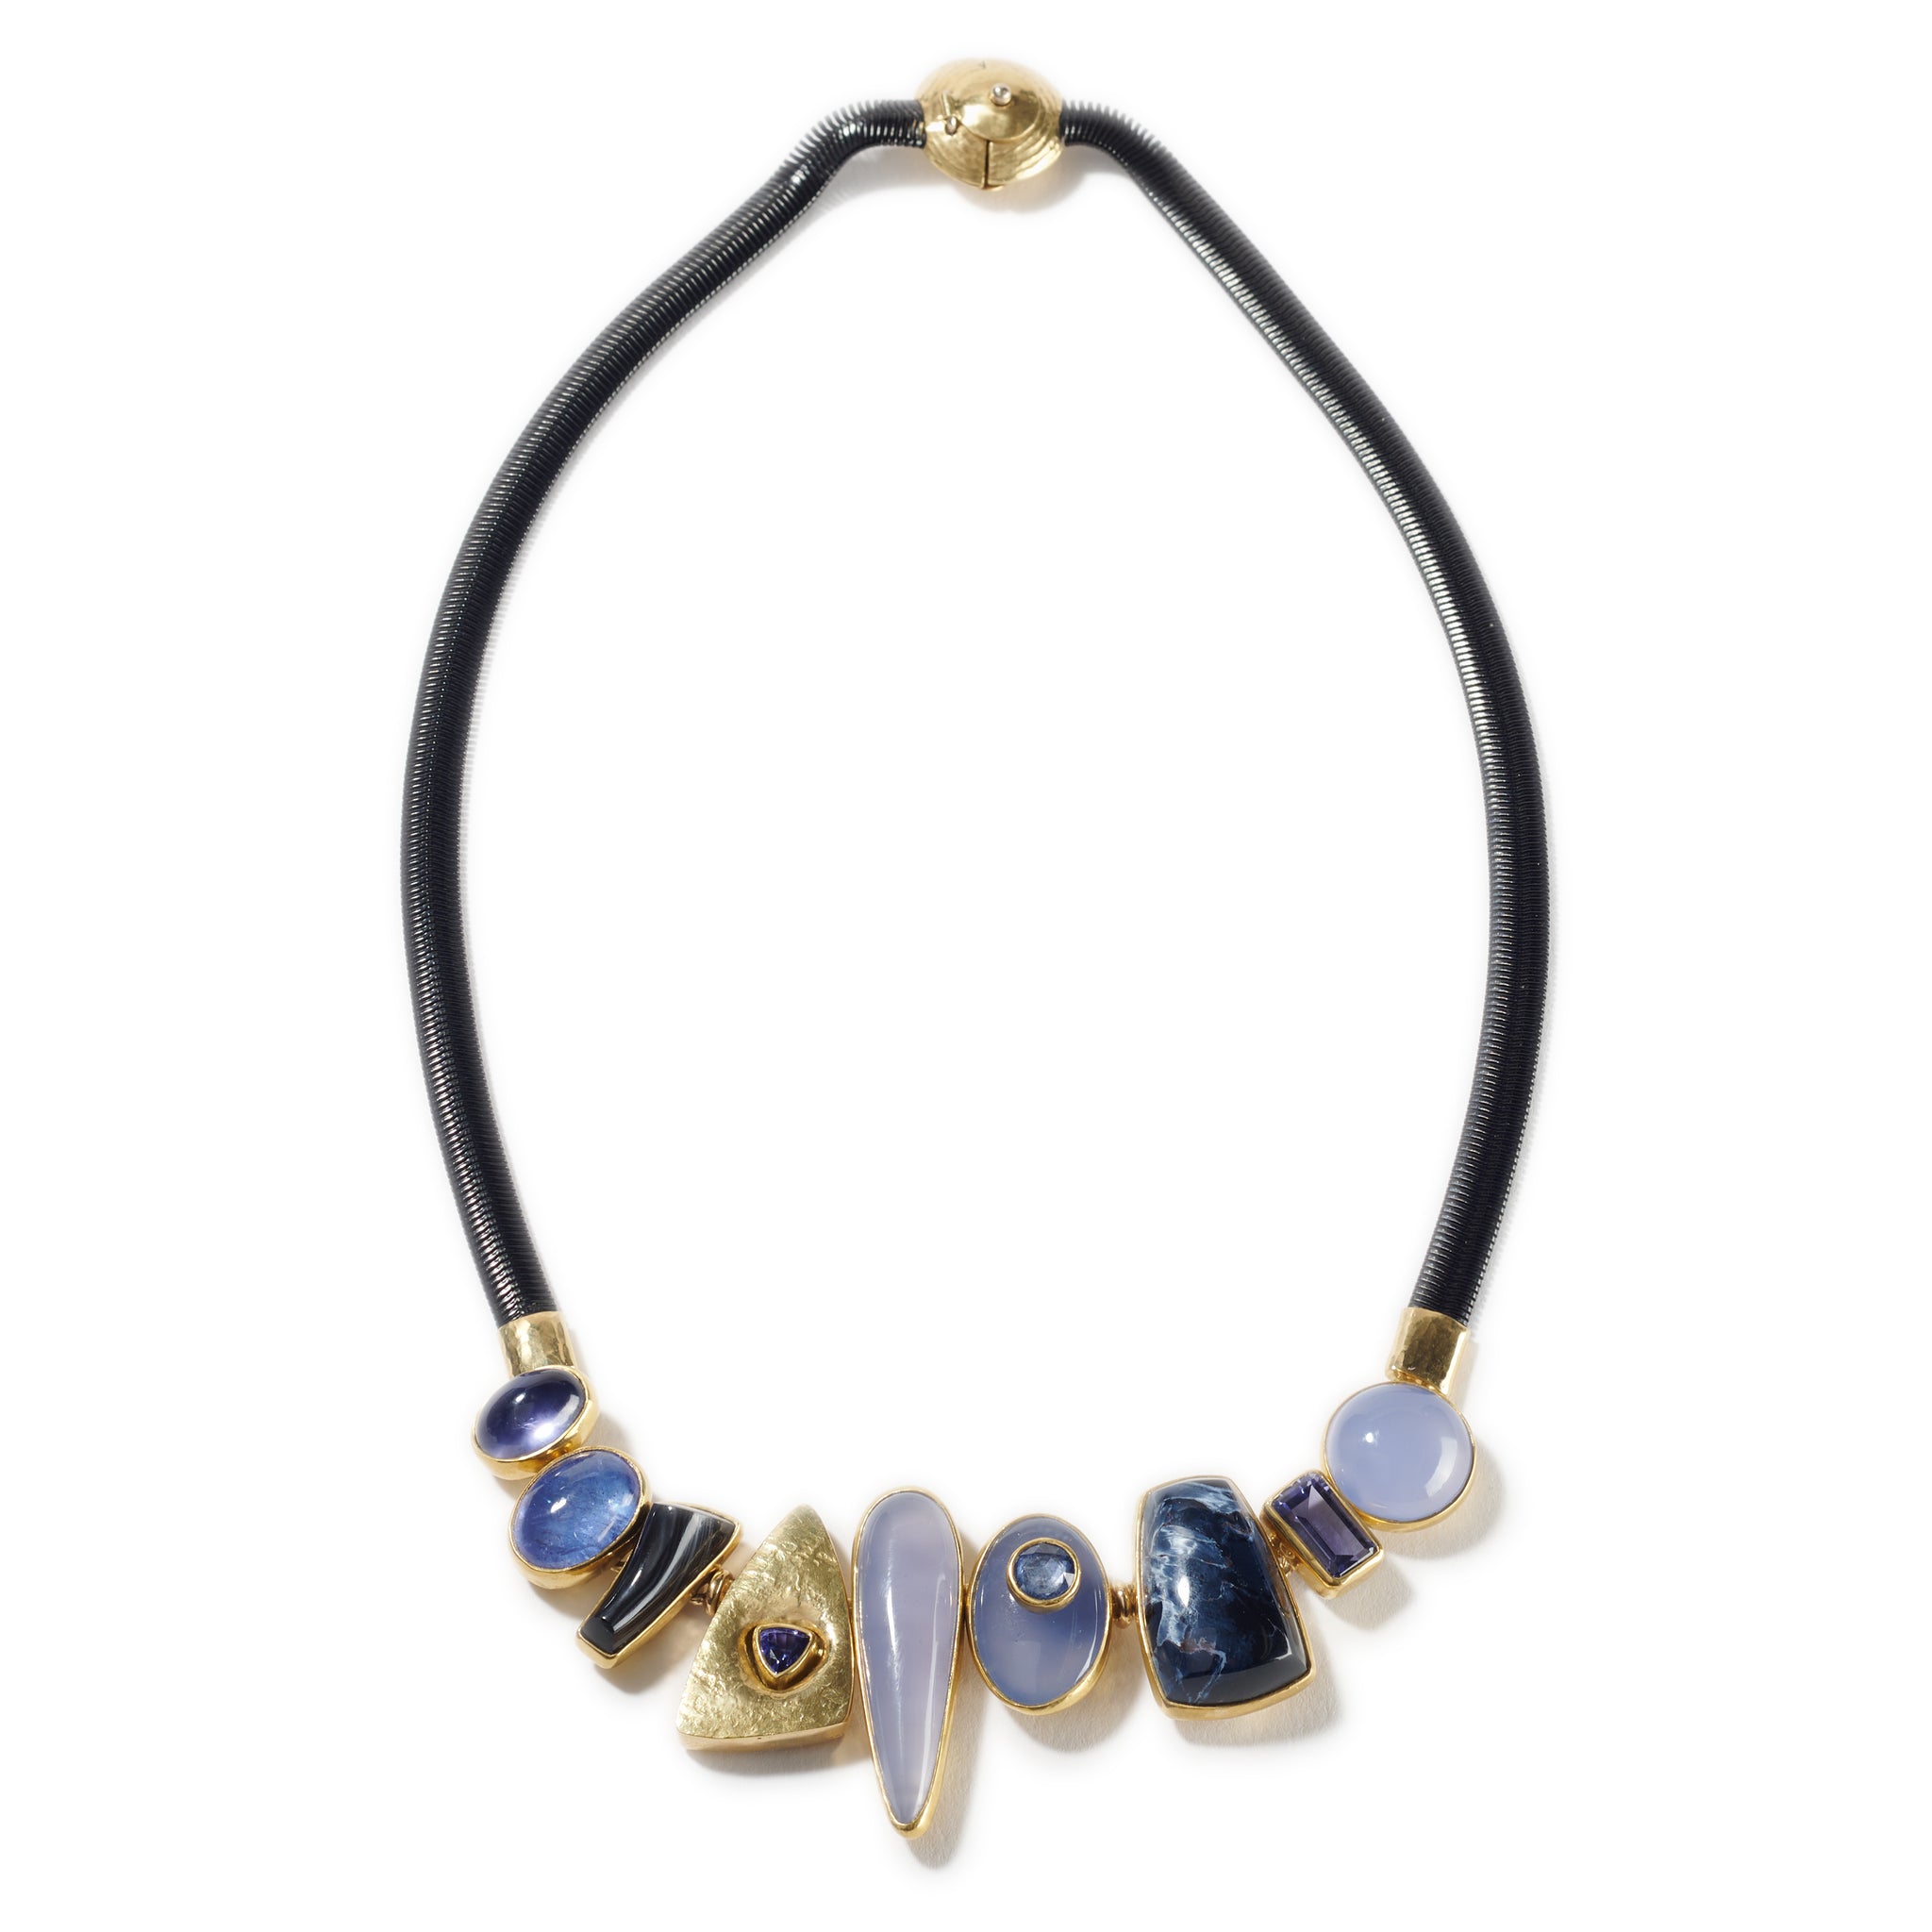 Necklace in Blues